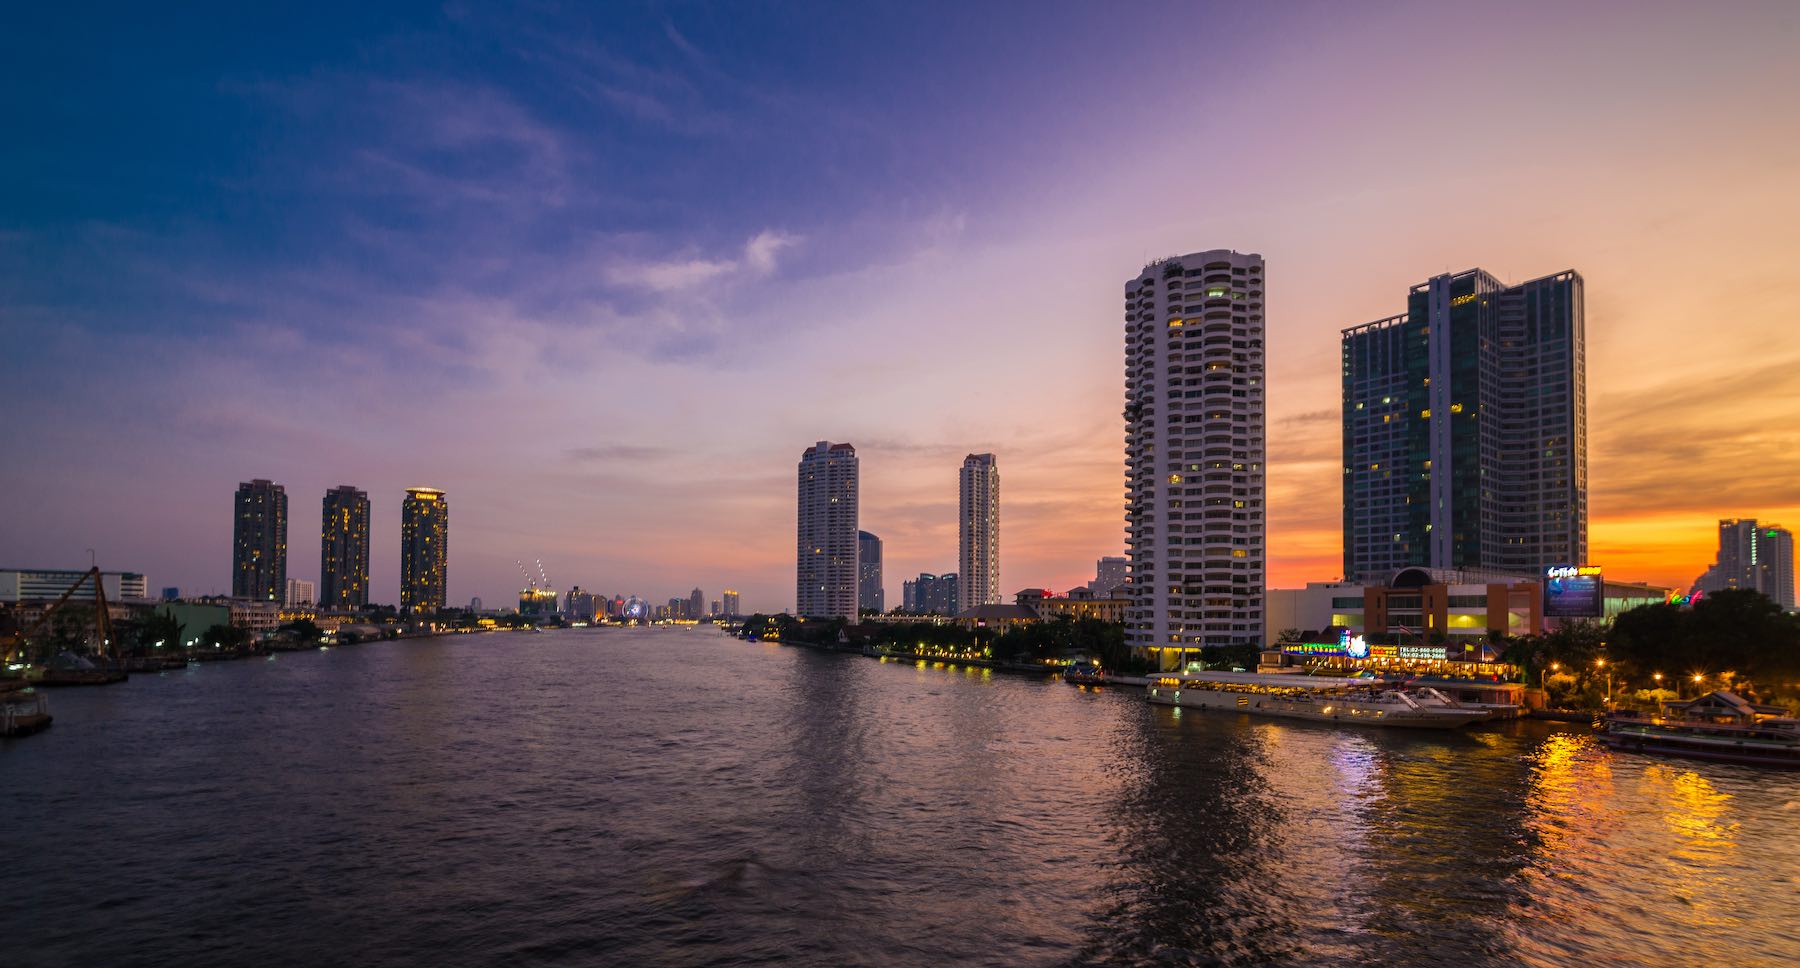 About the Chao Phraya River